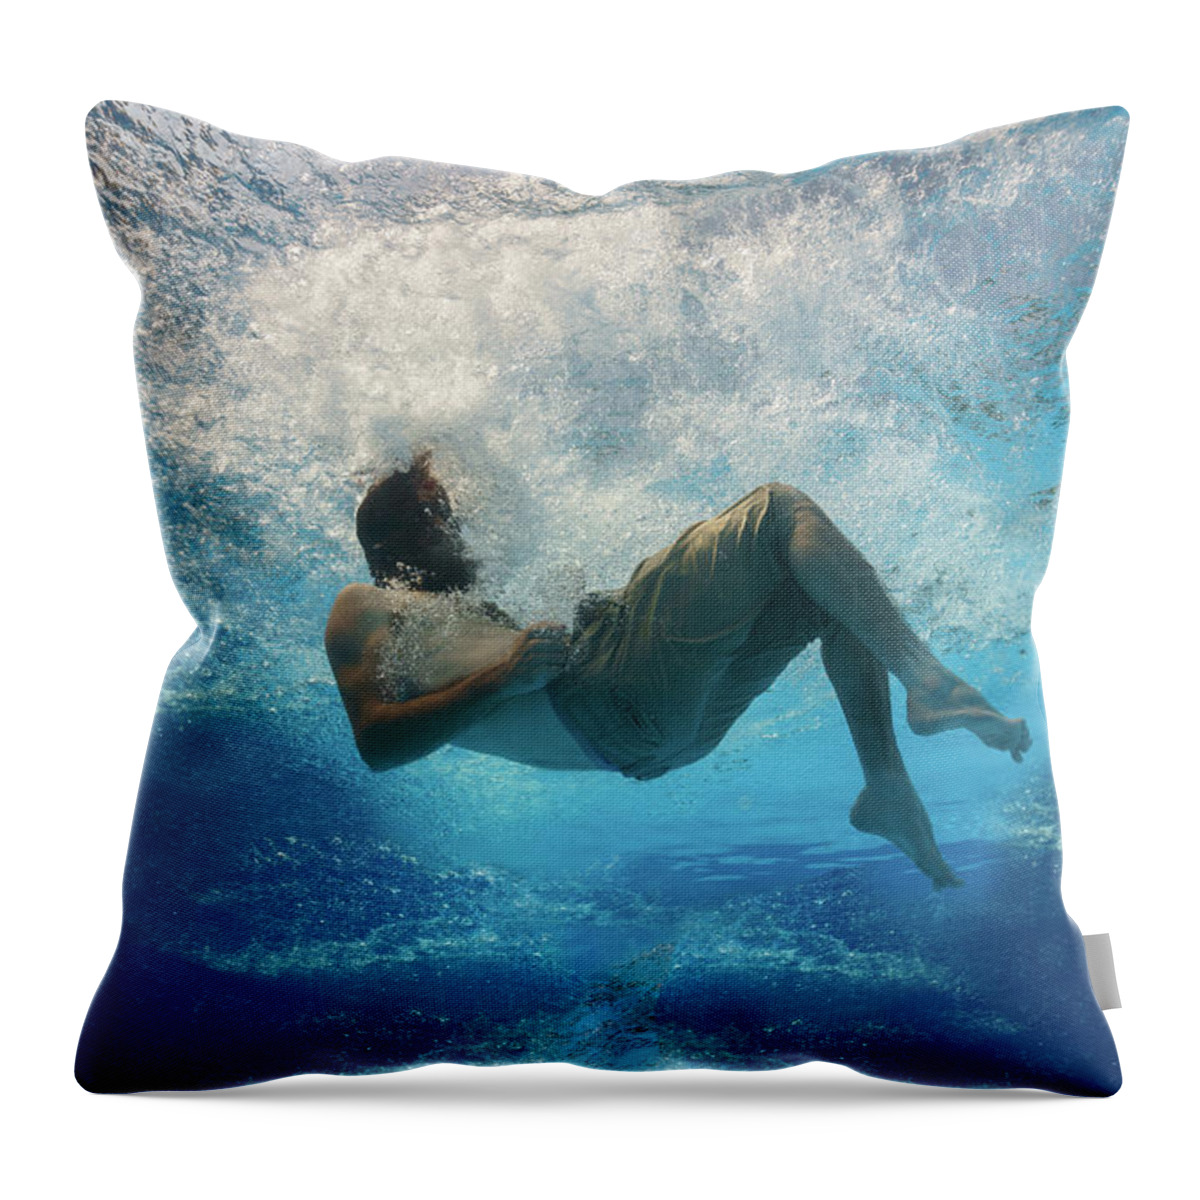 Fallen Throw Pillow featuring the photograph Falling - IX by Mark Rogers